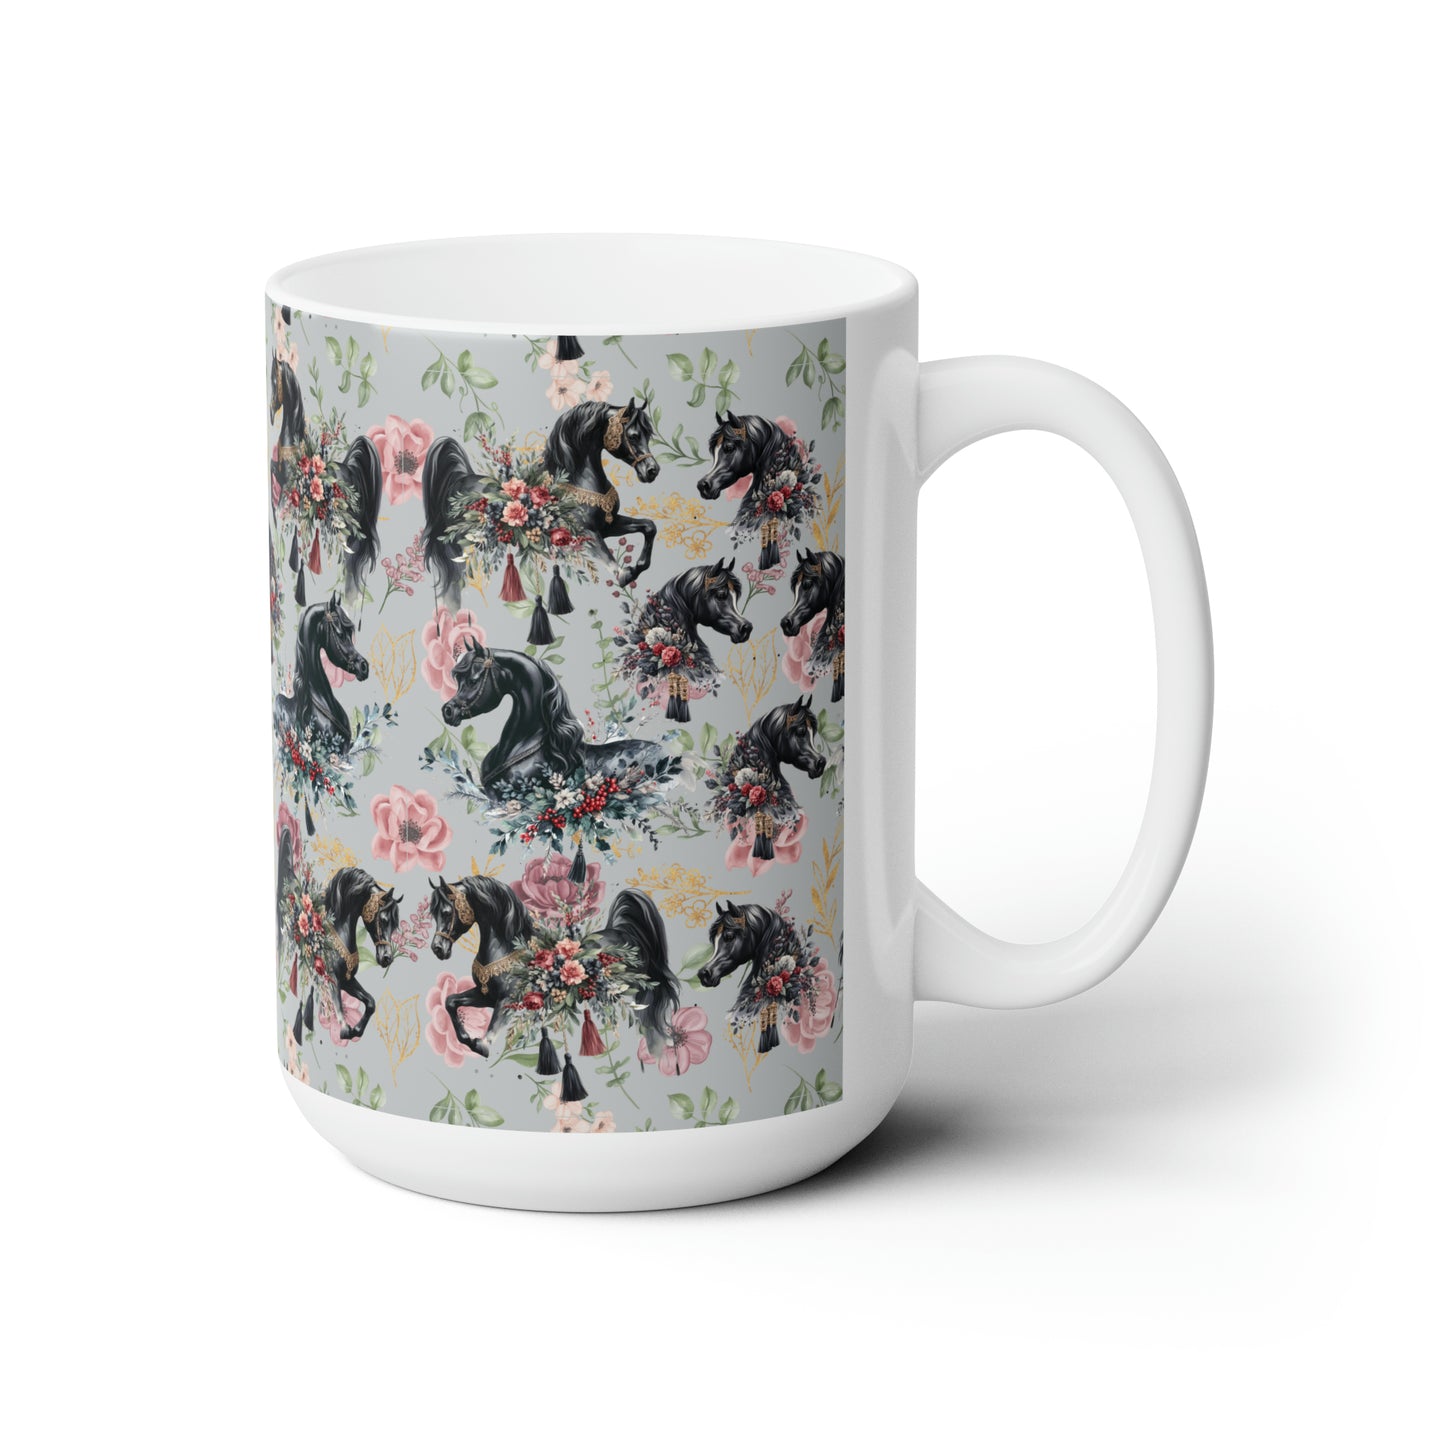 Black Horse Mug 15oz Coffee cup Tea Cup Hot beverage Arabian Horse Gift for Horse lover Horse Art Kitchen Coffee Lover Horse owner cafe